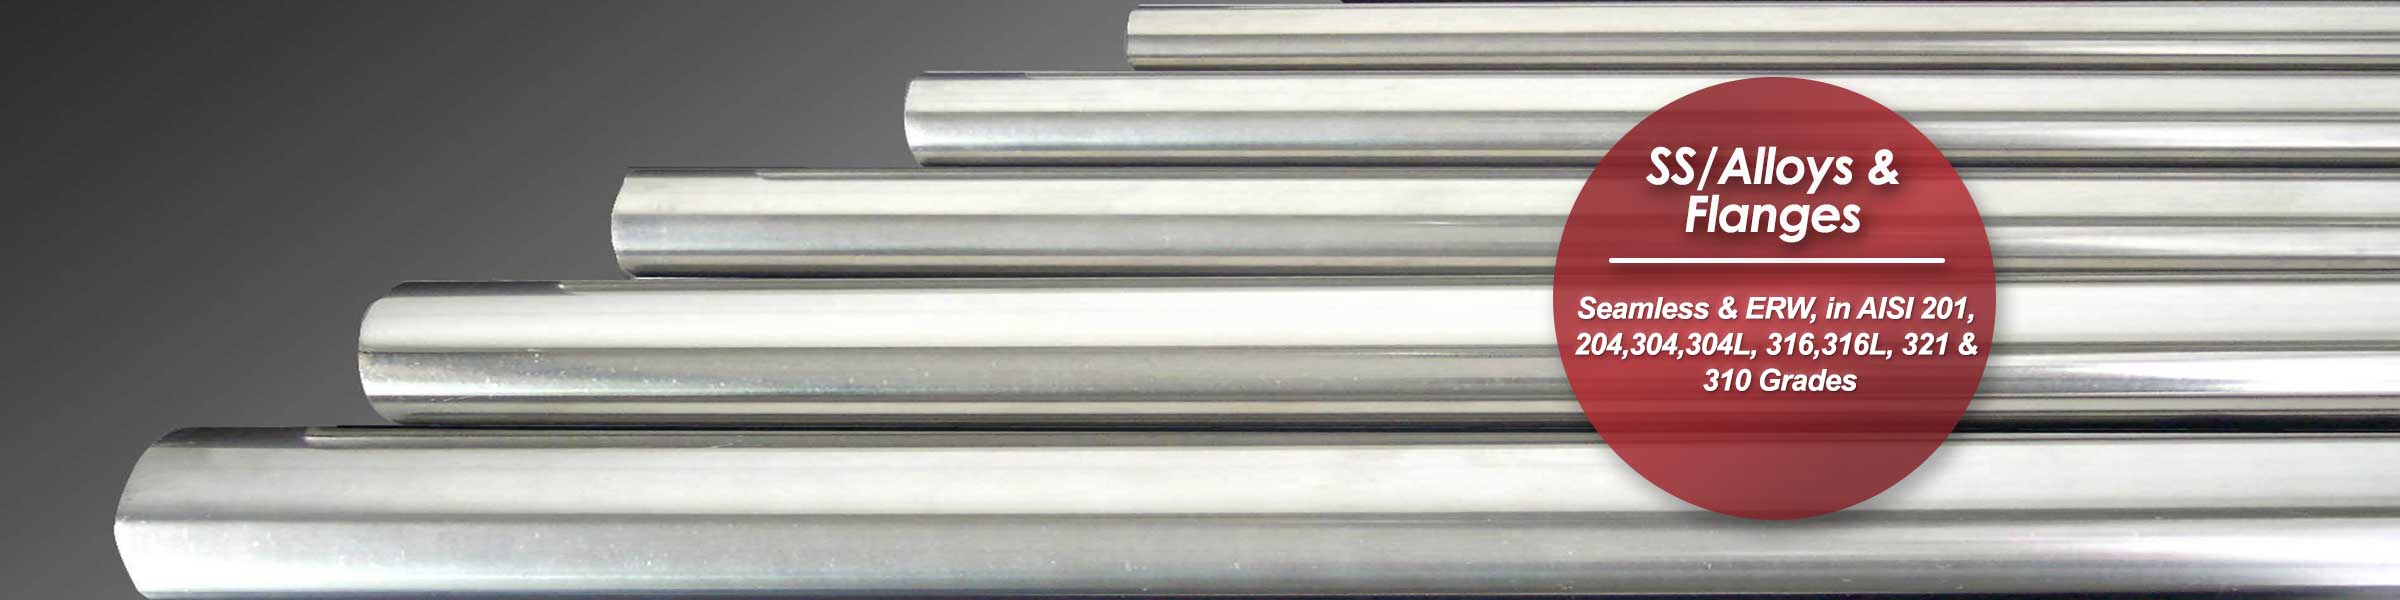 Stainless-steel-alloys-and-flanges.jpg
Alt Text: Industrial stainless steel products UAE, alloys and flanges
